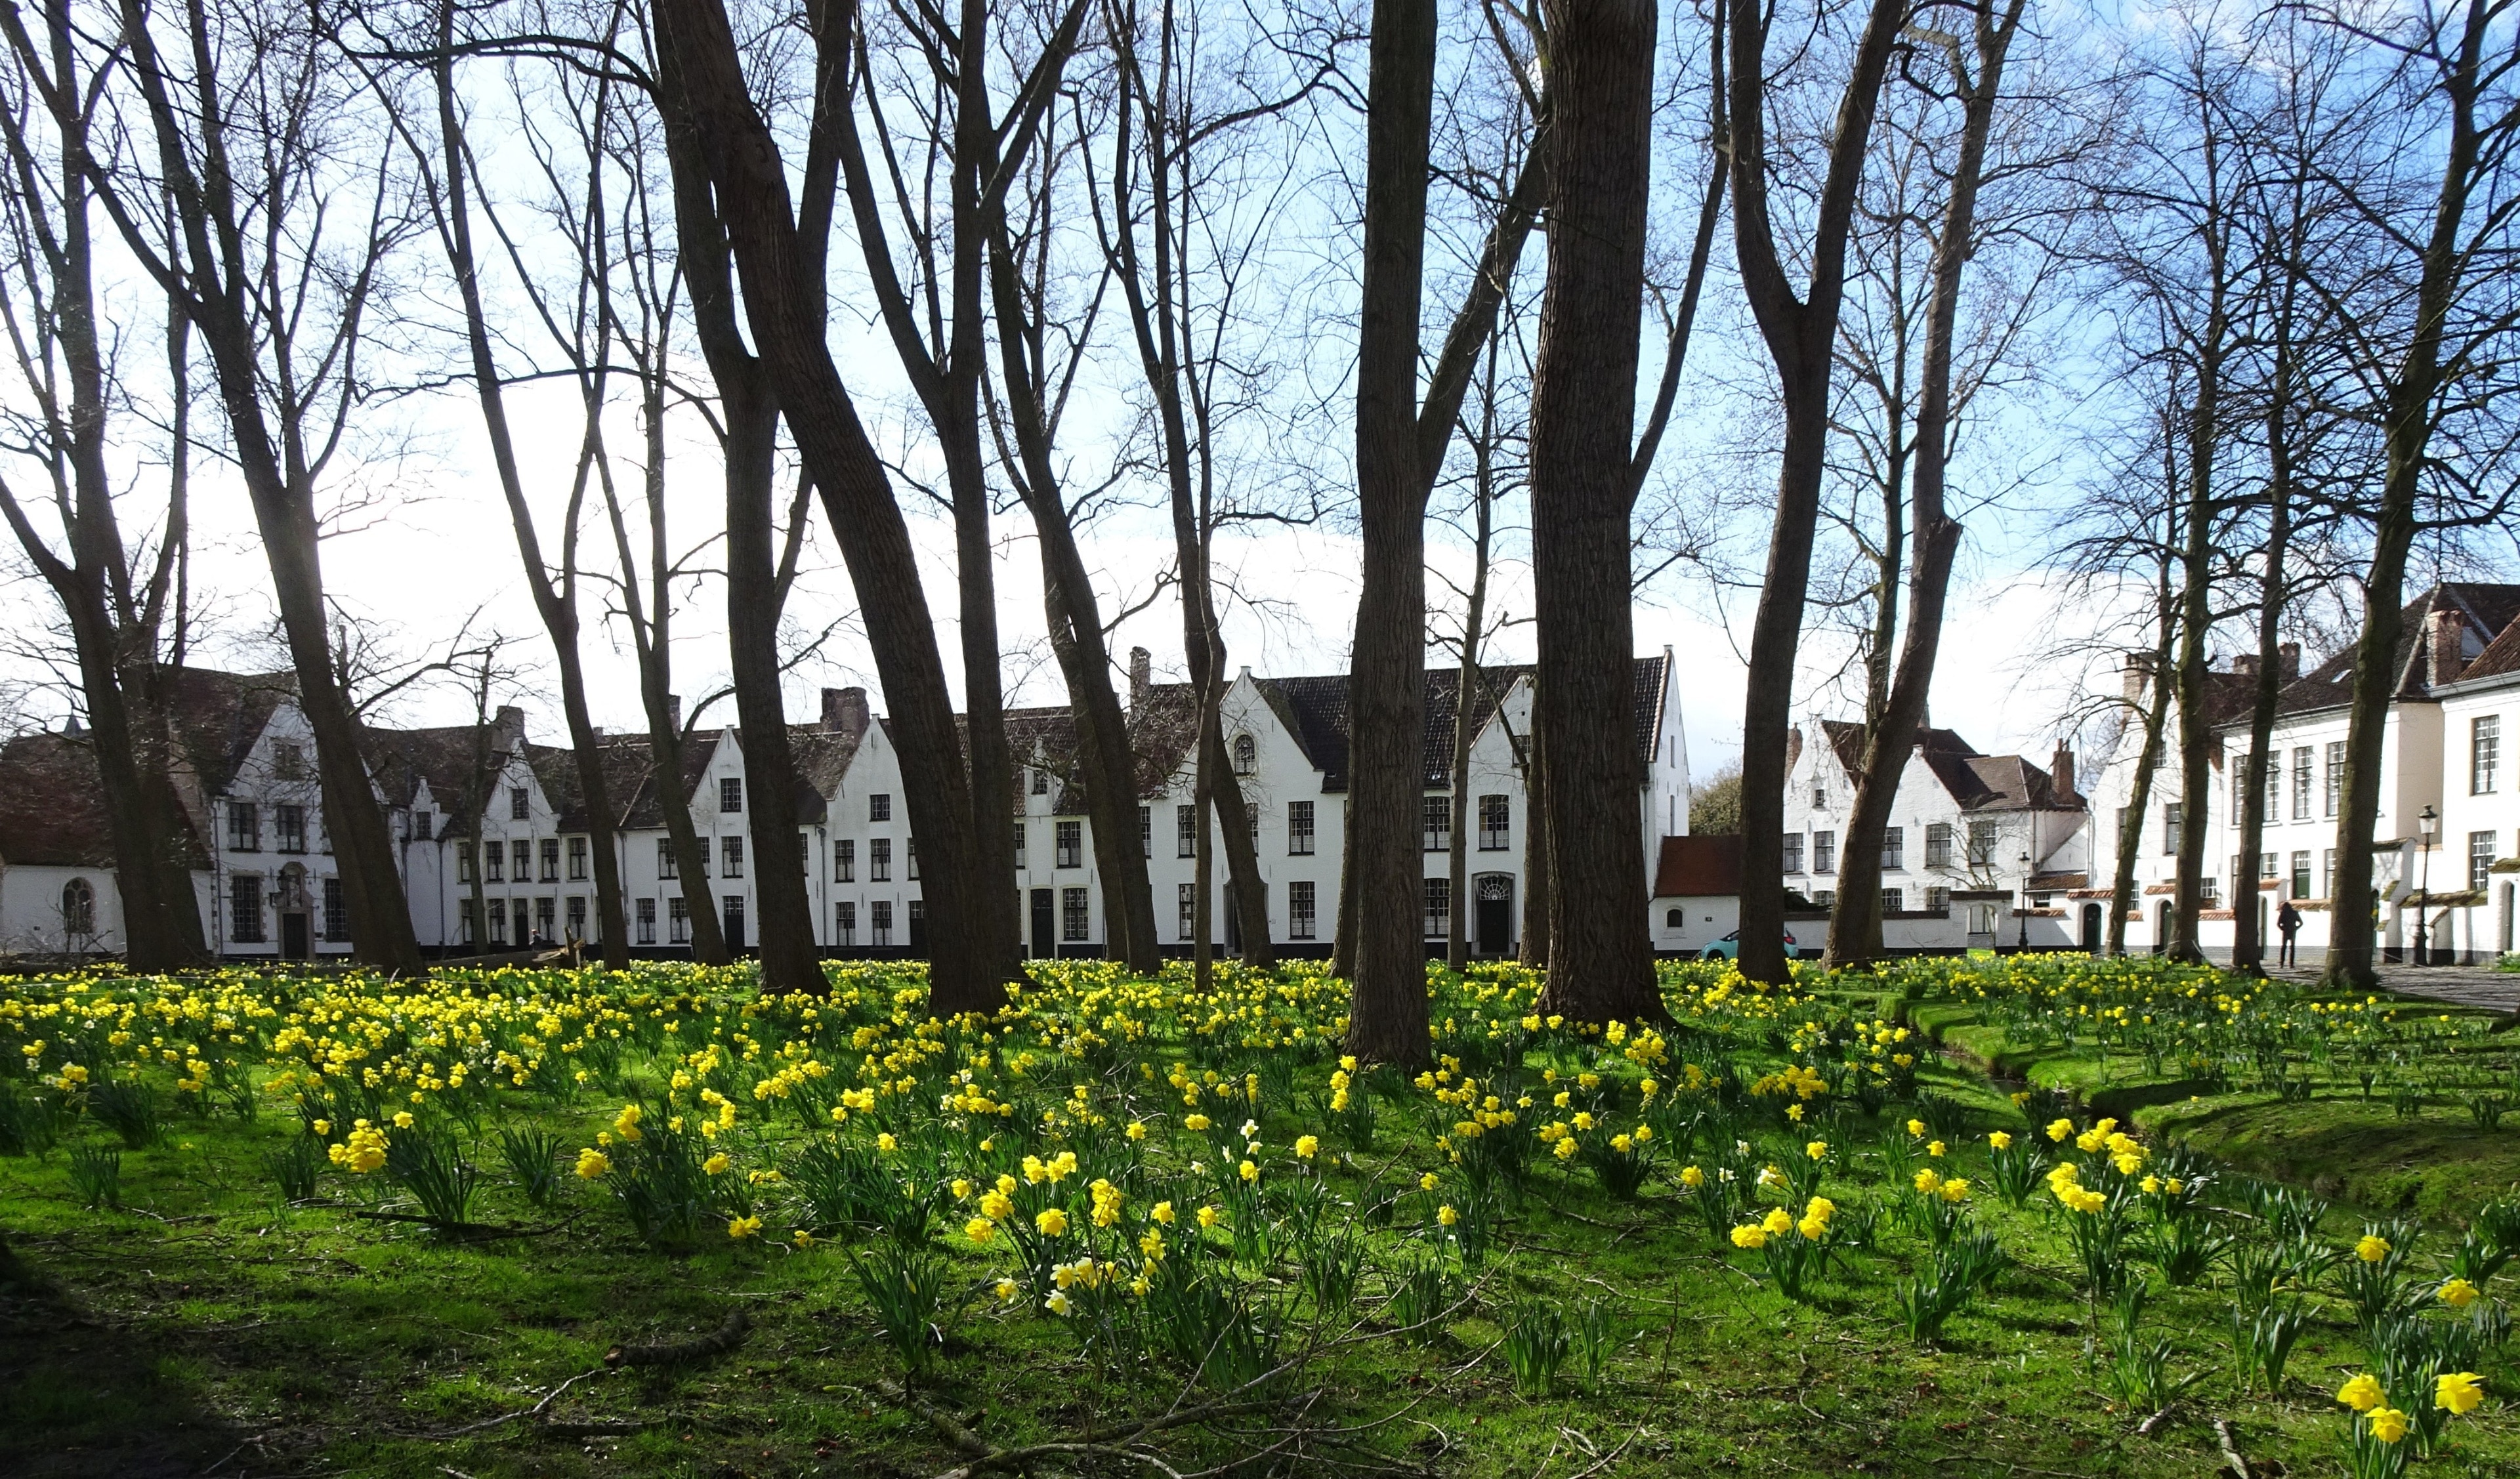 When I posted a first photo of the beguinage 2 weeks ago, there were hardly any flowers. Now, in the 2nd week of March, the ground is covered with a sea of daffodils.

The 'Princely Beguinage Ten Wijngaarde' with its white-coloured house fronts and tranquil convent garden was founded in 1245. This little piece of world heritage was once the home of the beguines, emancipated lay-women who nevertheless led a pious and celibate life. Today the beguinage is mainly inhabited by nuns of the Order of St. Benedict.
#Bruges  #Culture  #LocalSecrets  #Trovember  #History